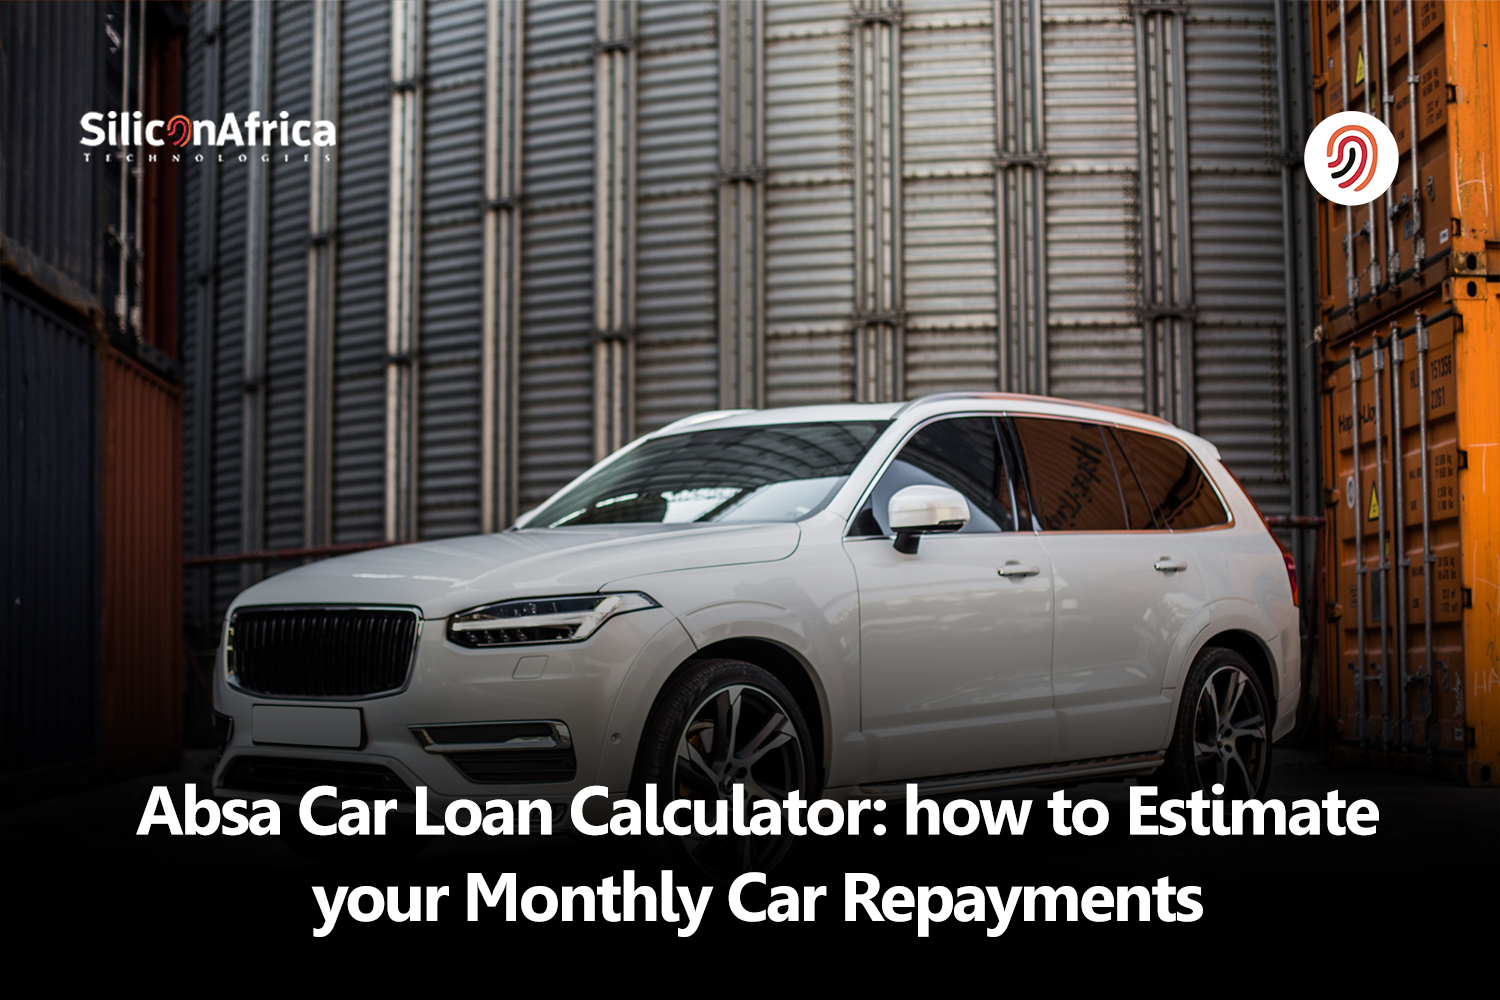 Absa Car Loan Calculator: How to Estimate Your Monthly Car Repayments